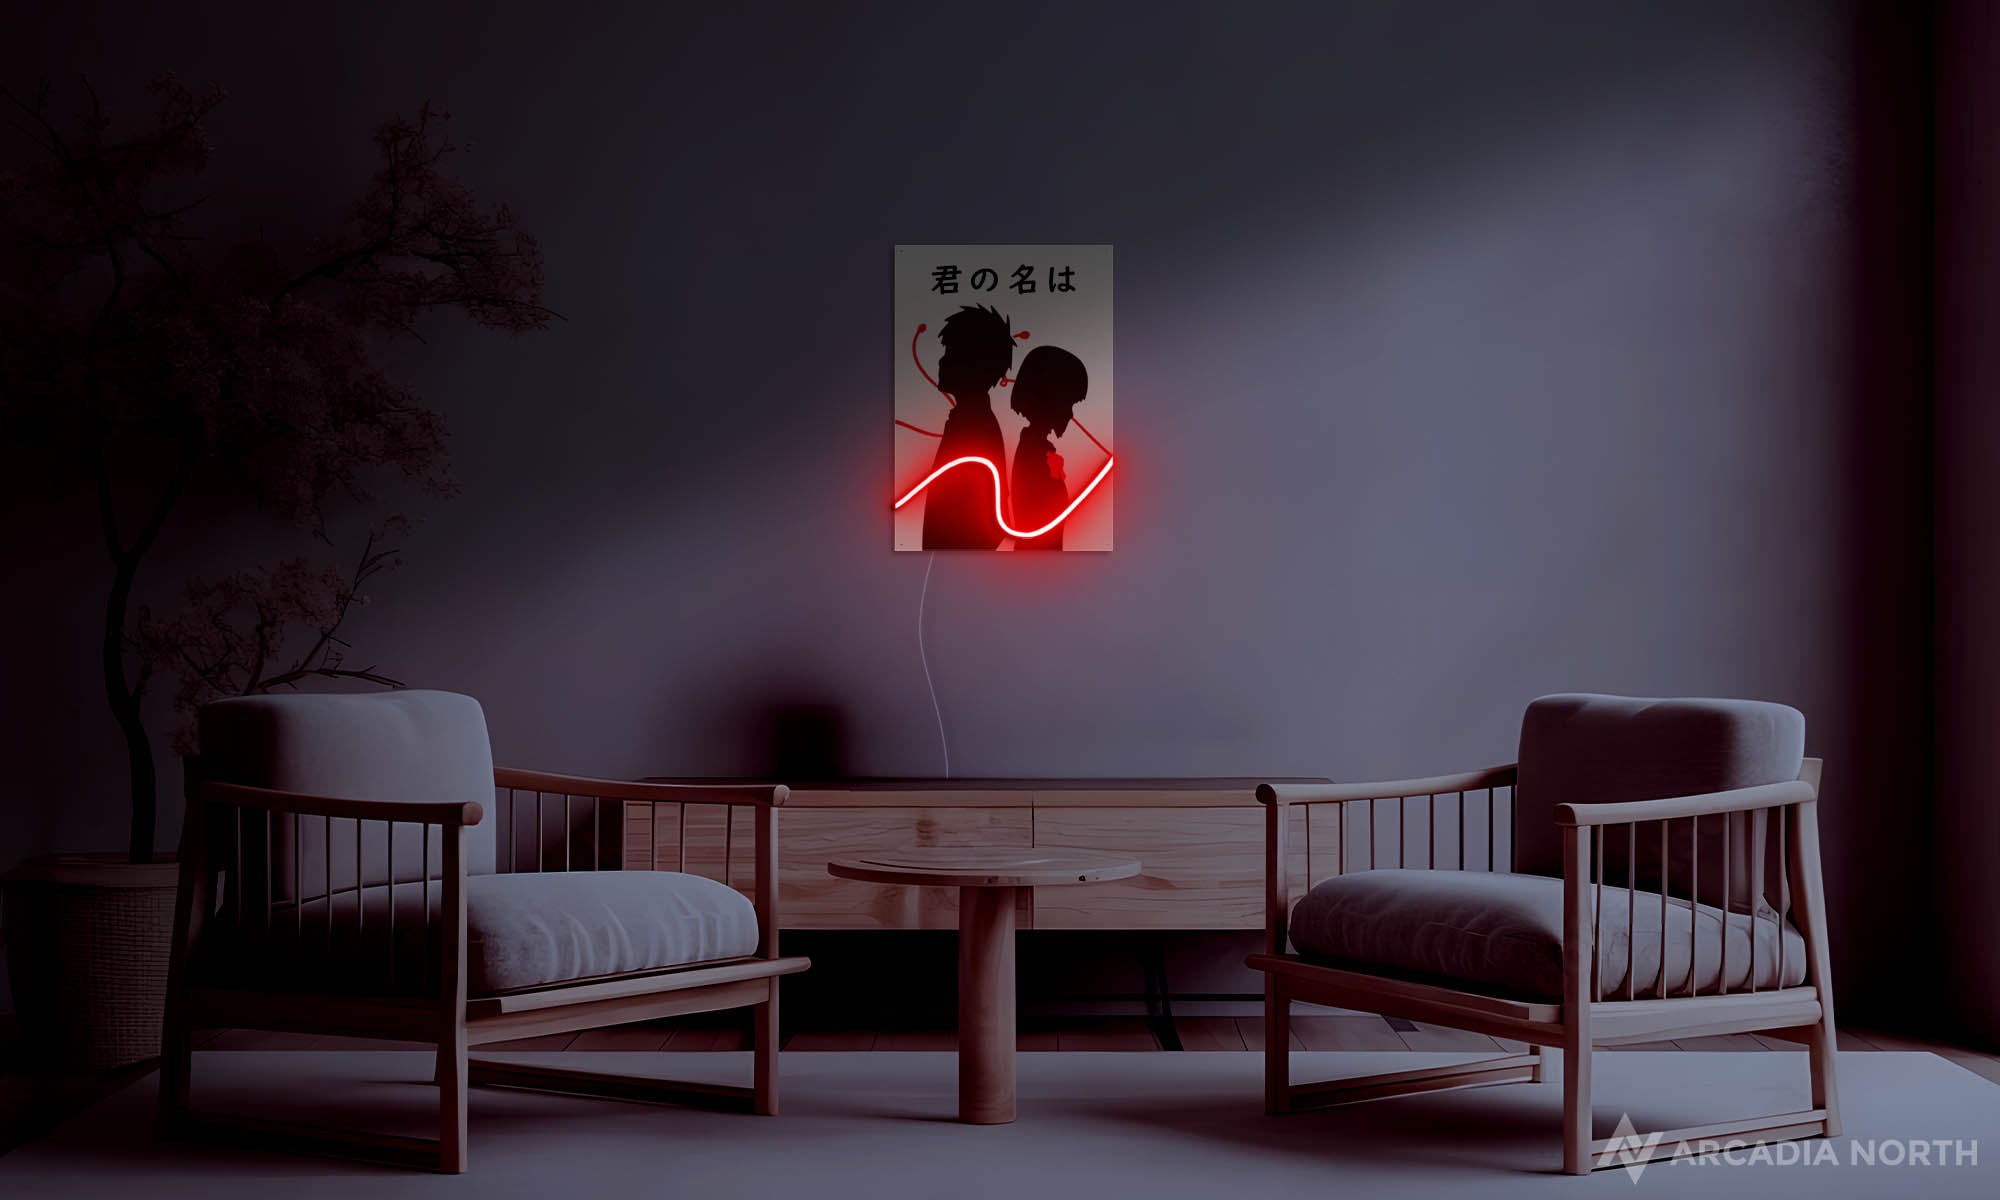 Arcadia North Original LED Poster of the anime Your Name Kimi no Na wa by Makoto Shinkai featuring Mitsuha and Taki with the red string of fate illuminated by LED neon lights. UV-printed poster on acrylic